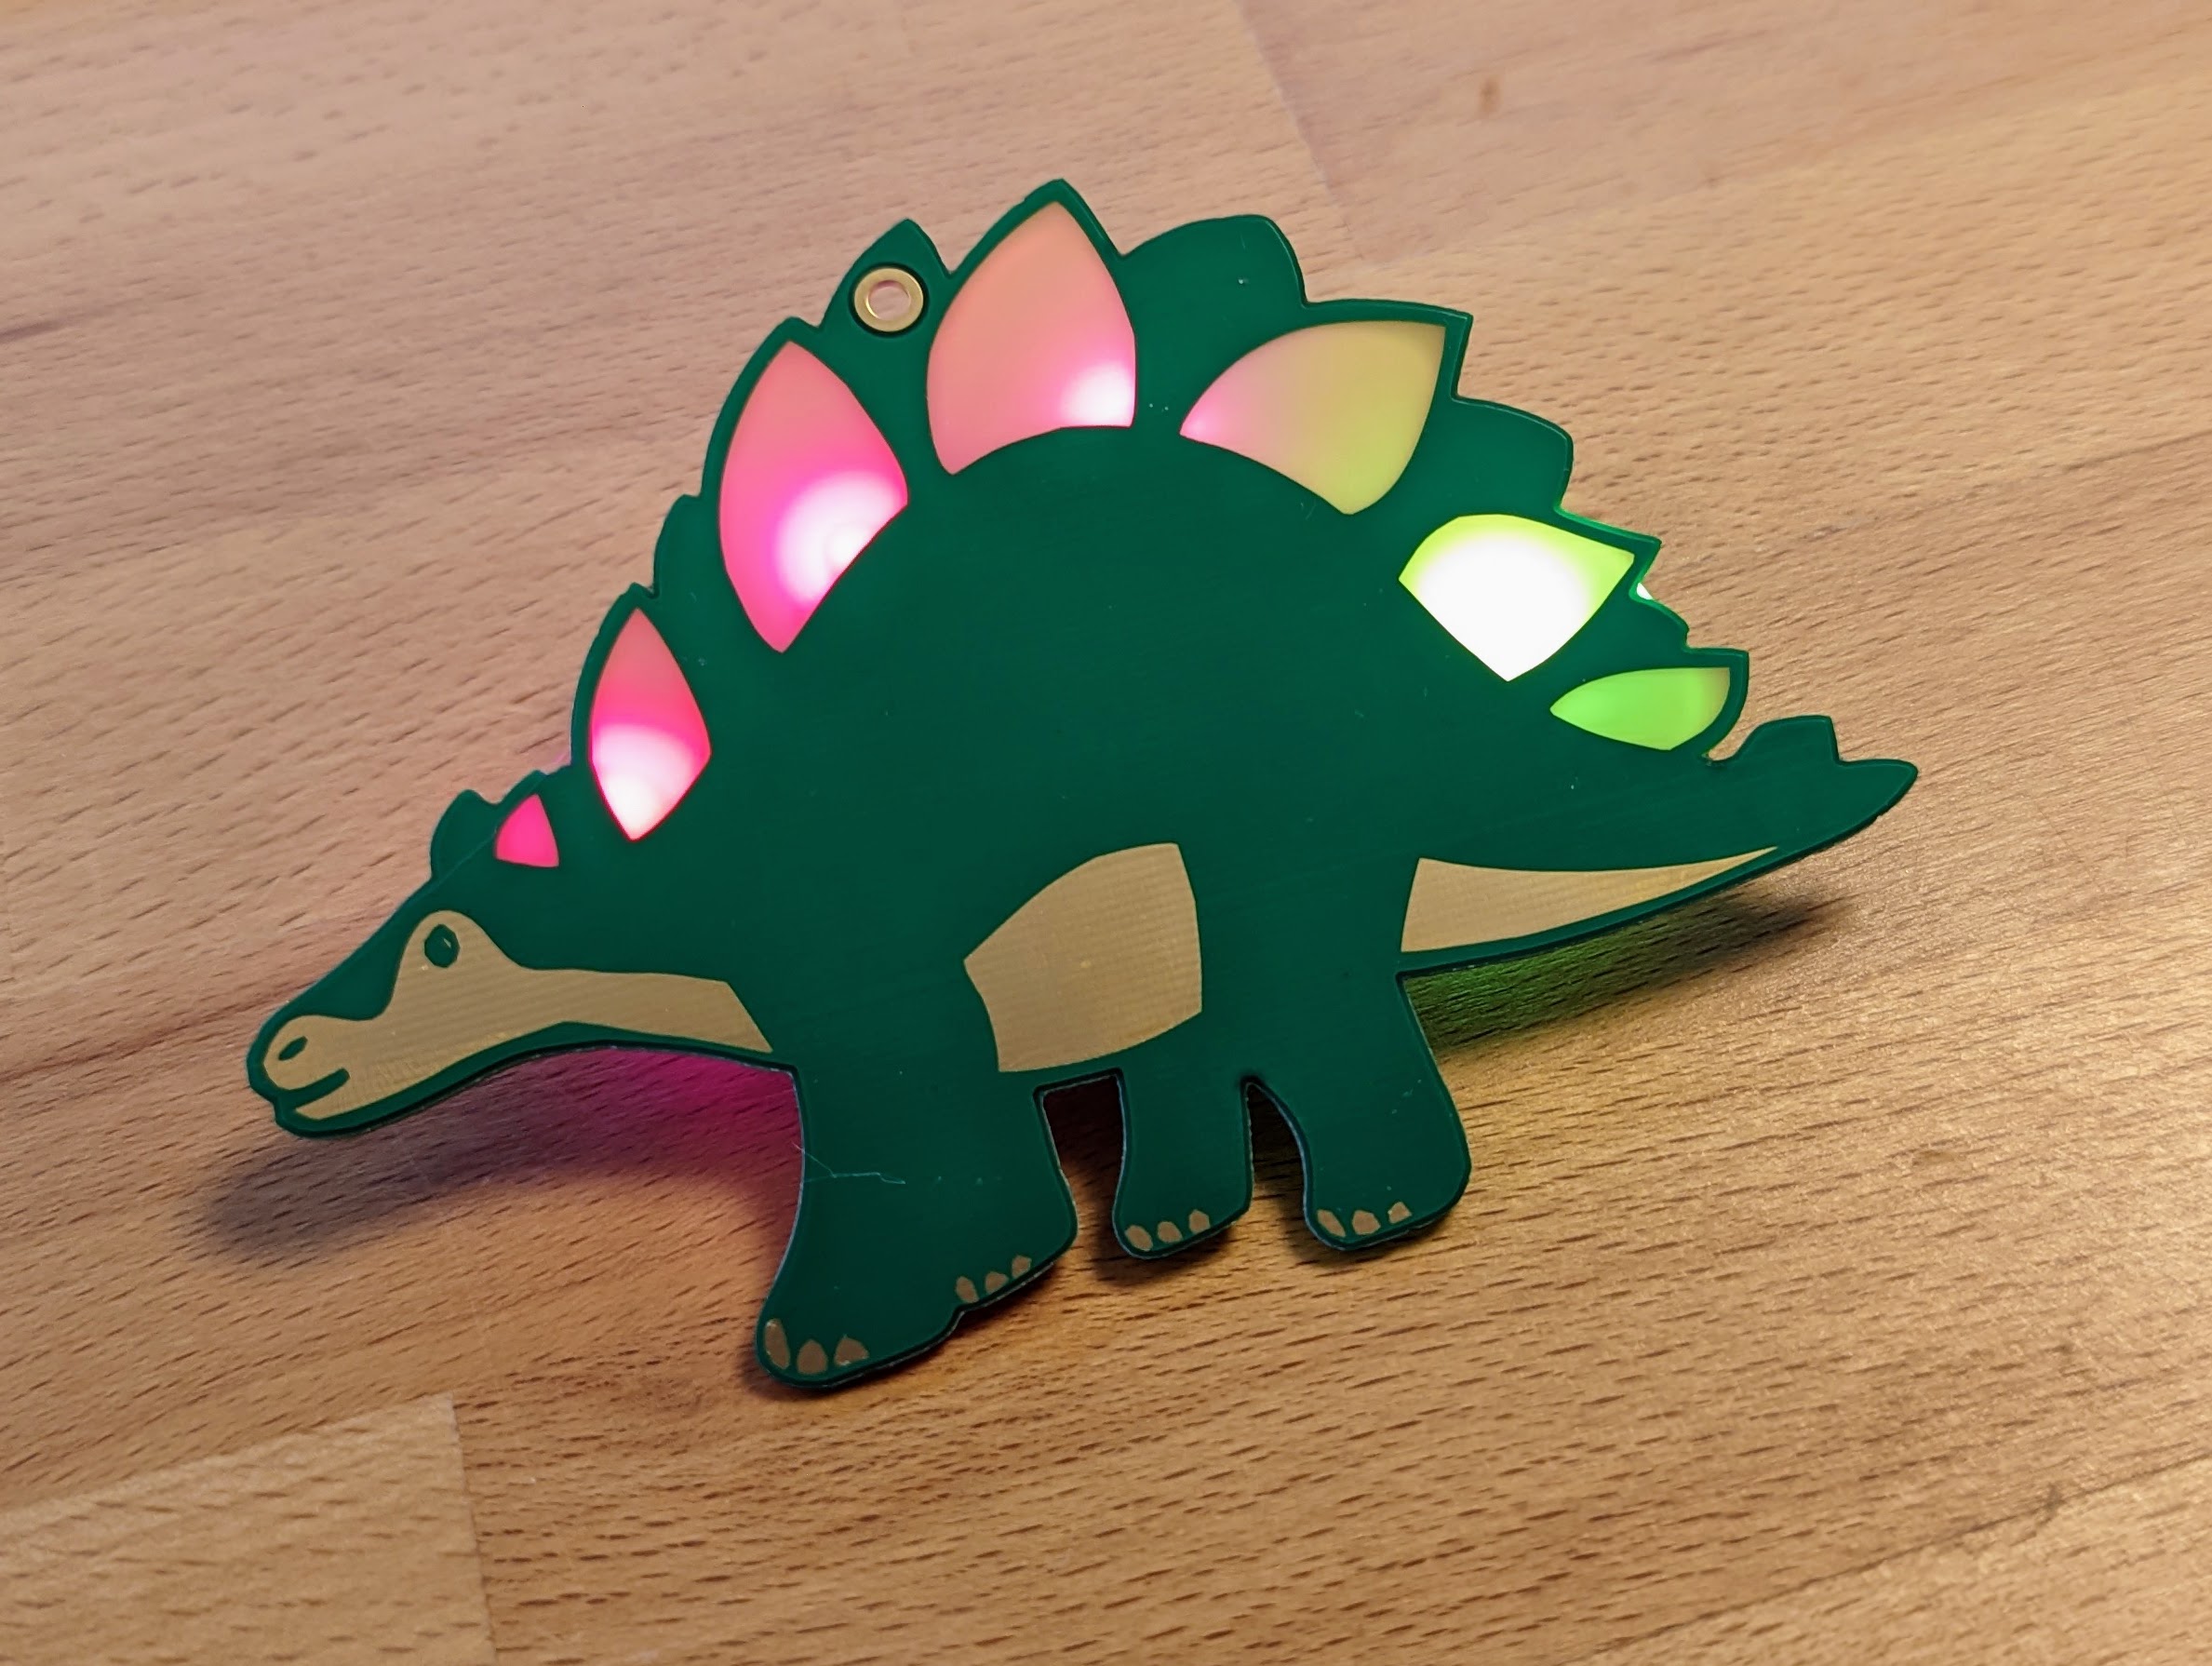 Dino - From a time long gone, this soldering kit glows in all the colours of the rainbow